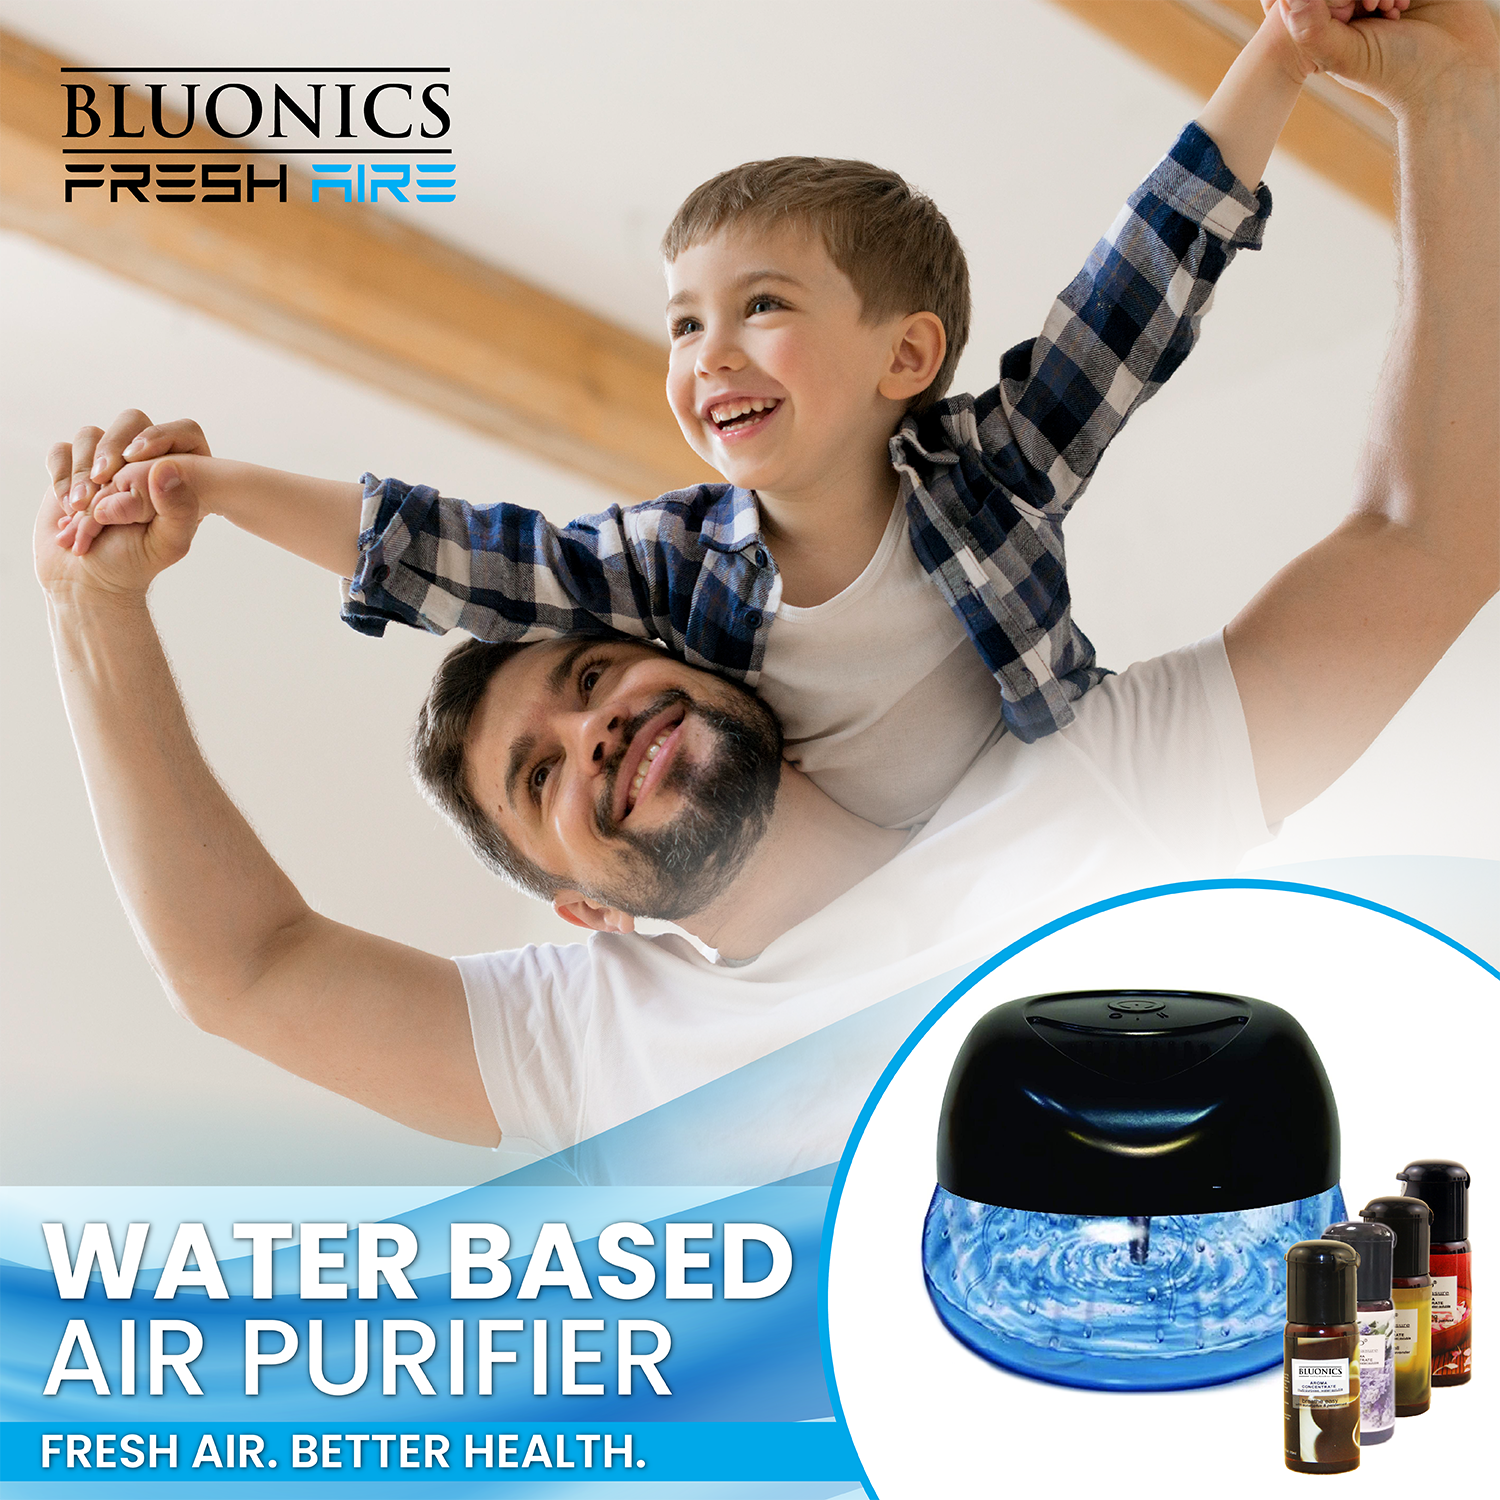 Fresh Aire, Bluonics Water Air Purifier with a bottle of Breathe Lavender 7 LED Night Light Use your Fragrance/Essential Oils Removes Smoke & Odors